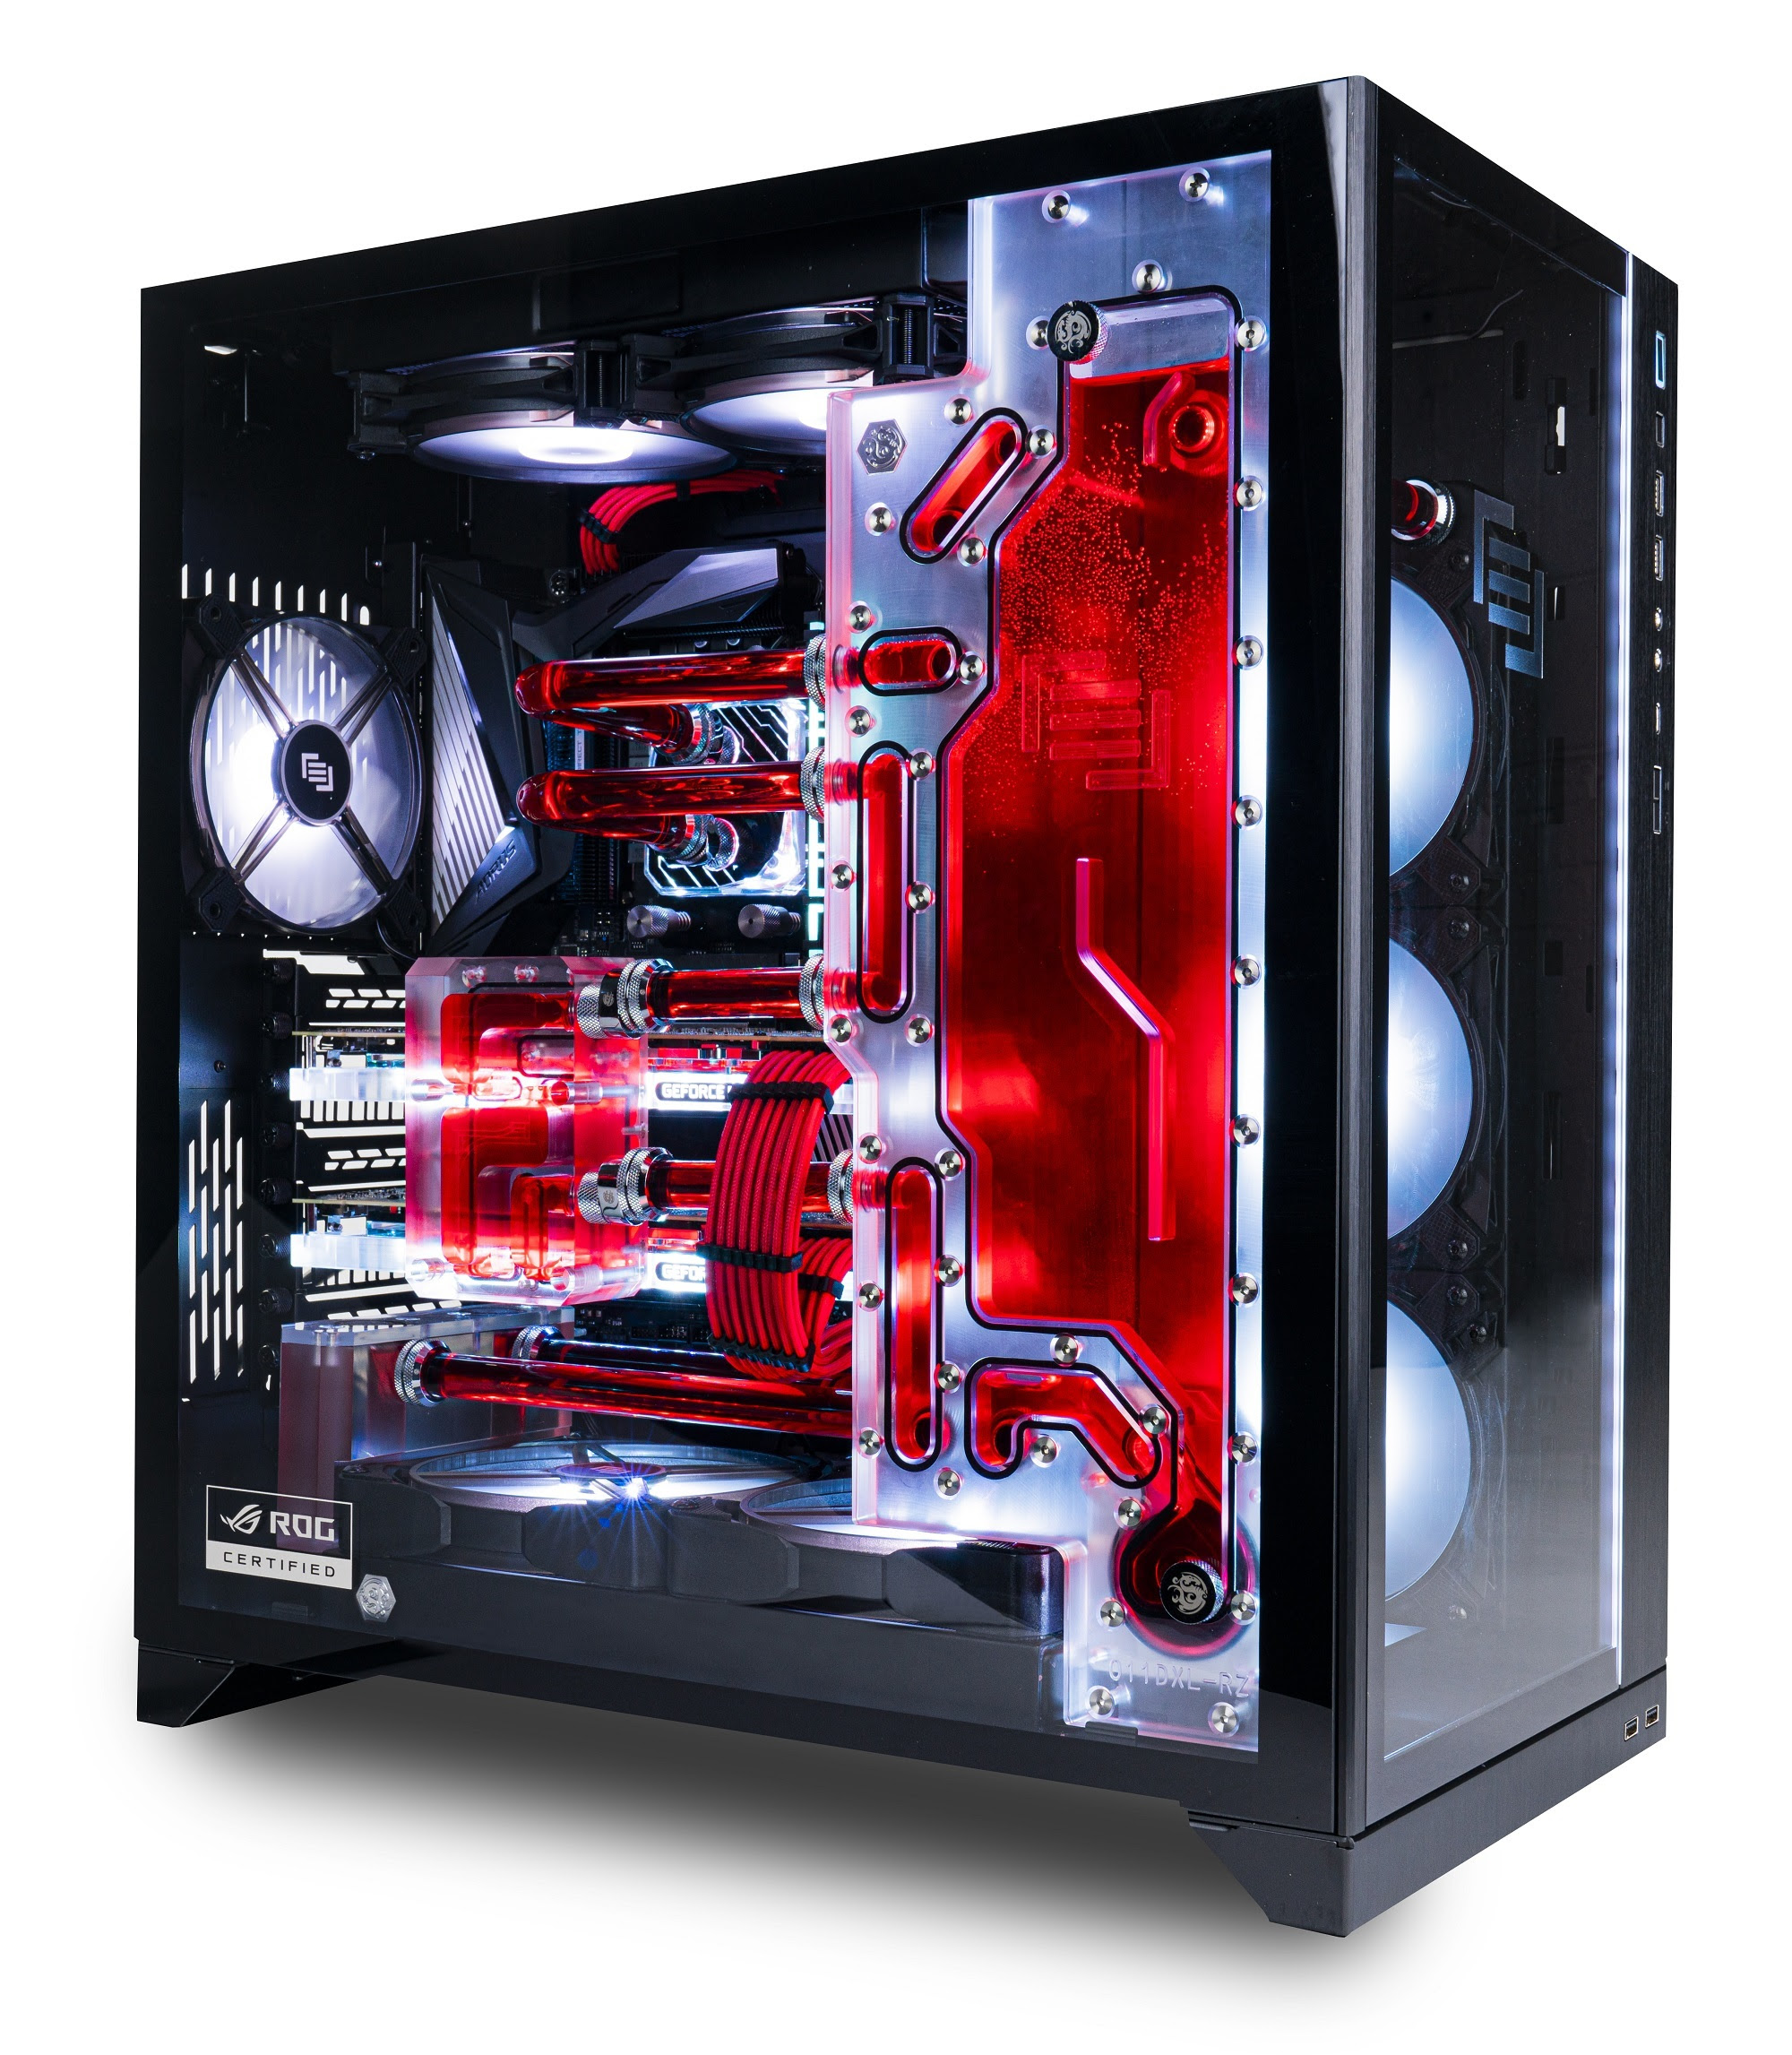 MAINGEAR Launches Ultra High-End “RUSH” Gaming Desktop Featuring Latest Generation Intel® and AMD® Processors and Dual NVIDIA® TITAN RTX™ Graphics Cards